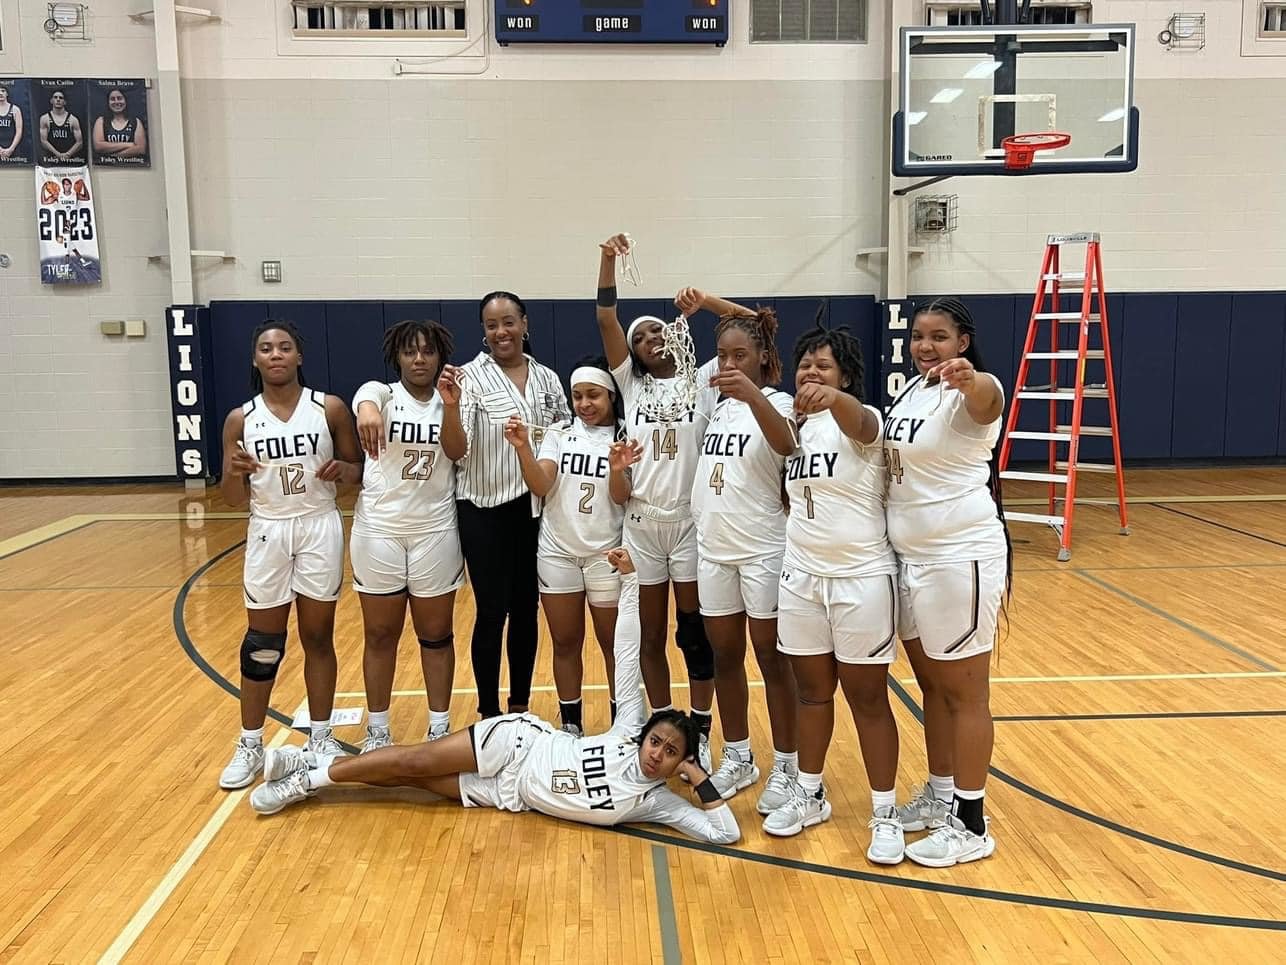 The Foley Lions claimed the Class 7A Area 2 championship 61-48 over Daphne Friday, Feb. 10, and earned a top seed entering the AHSAA state basketball tournament. Foley drew Central Phenix City in the first round as one of nine local teams in the final stage of the playoffs.